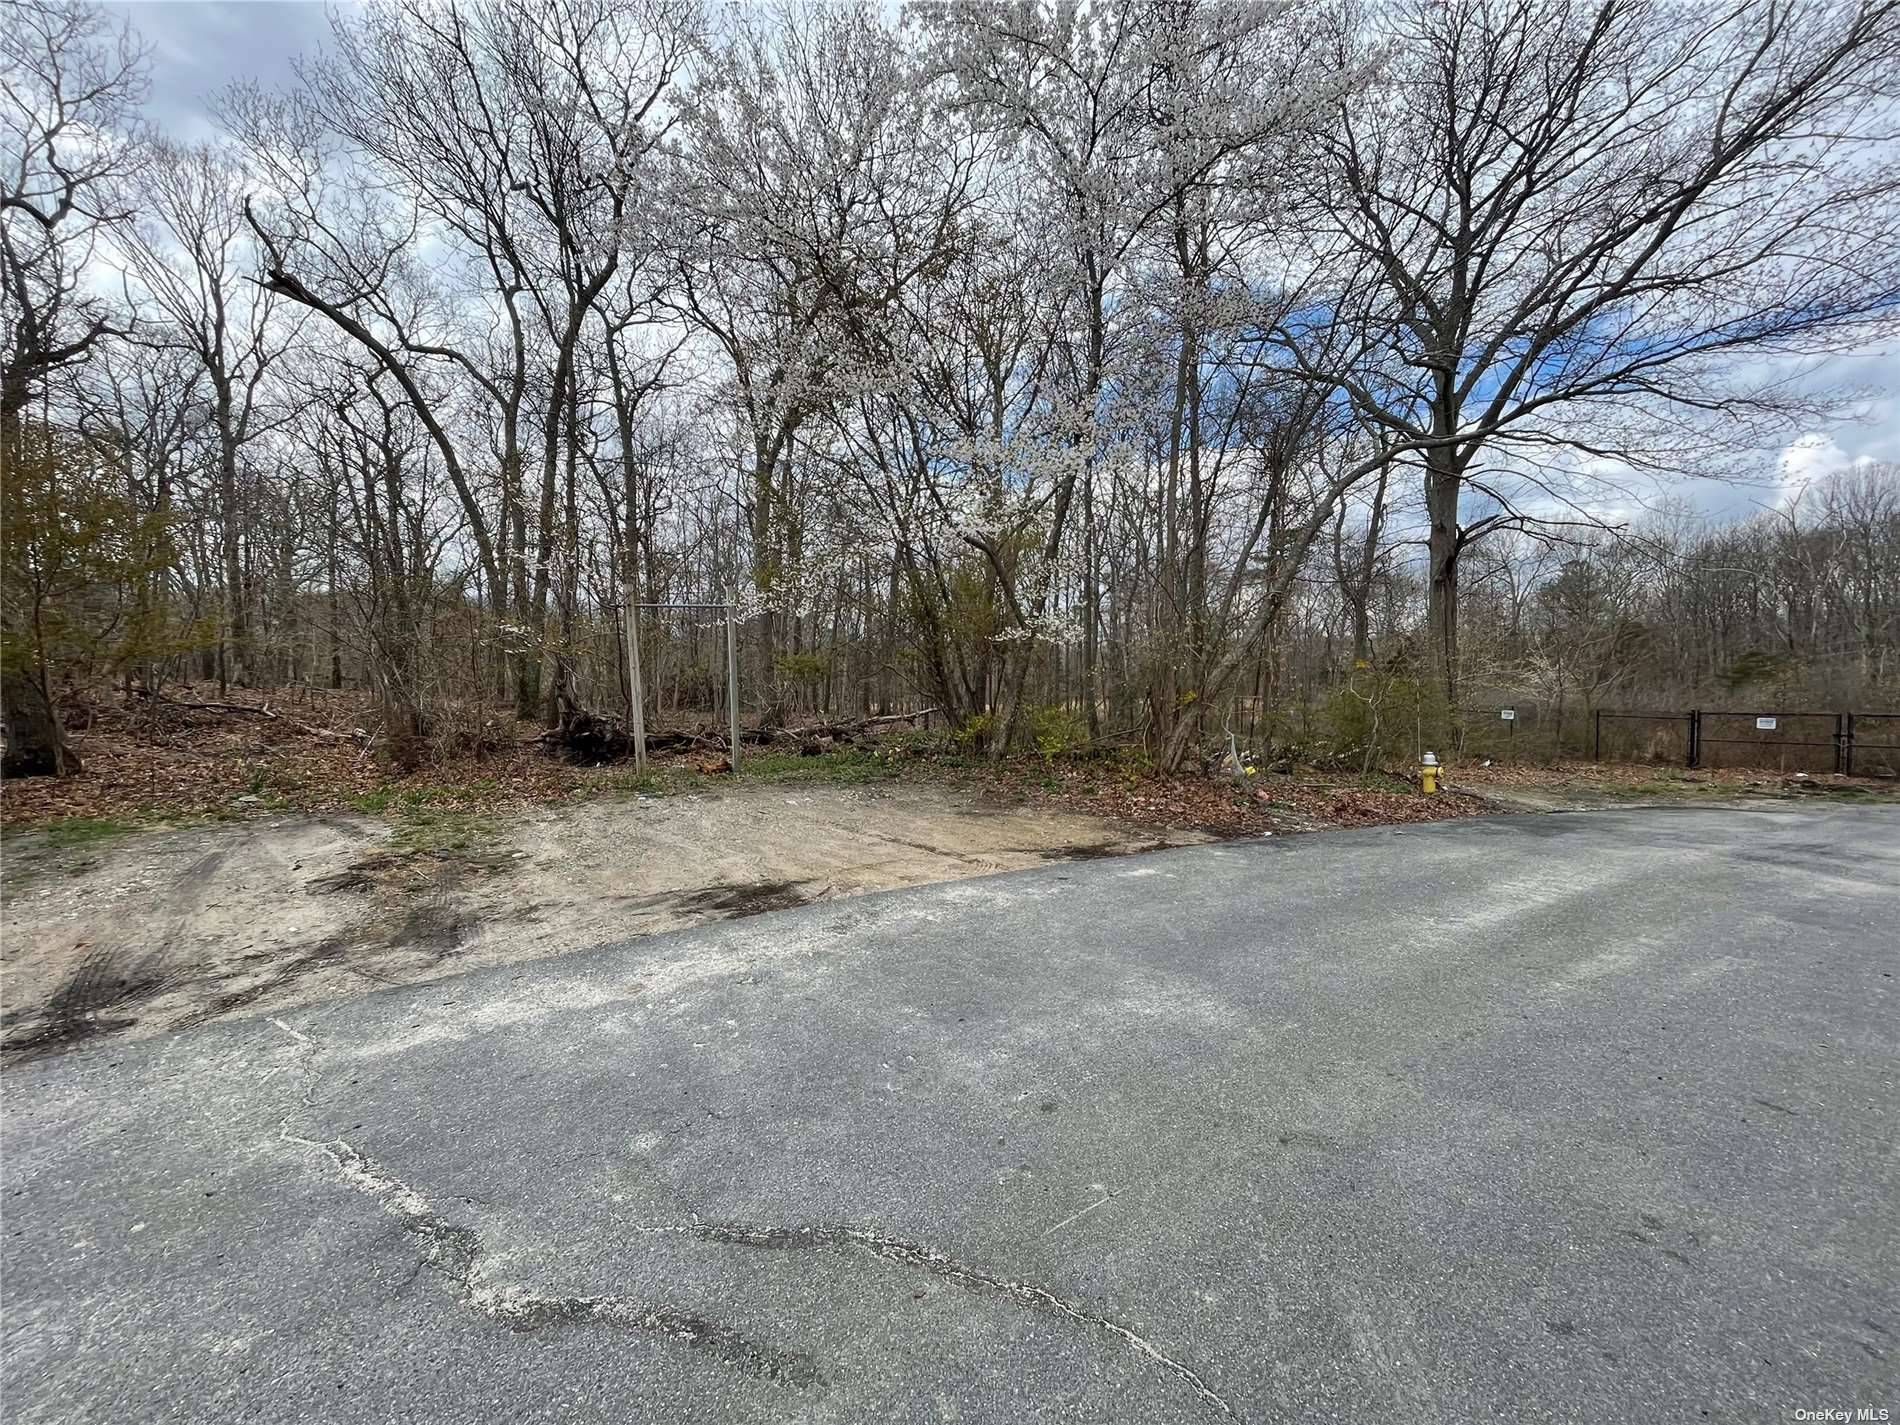 Large Dead End Property, Build The Home Of Your Dreams On This Oversized Half Acre Lot.